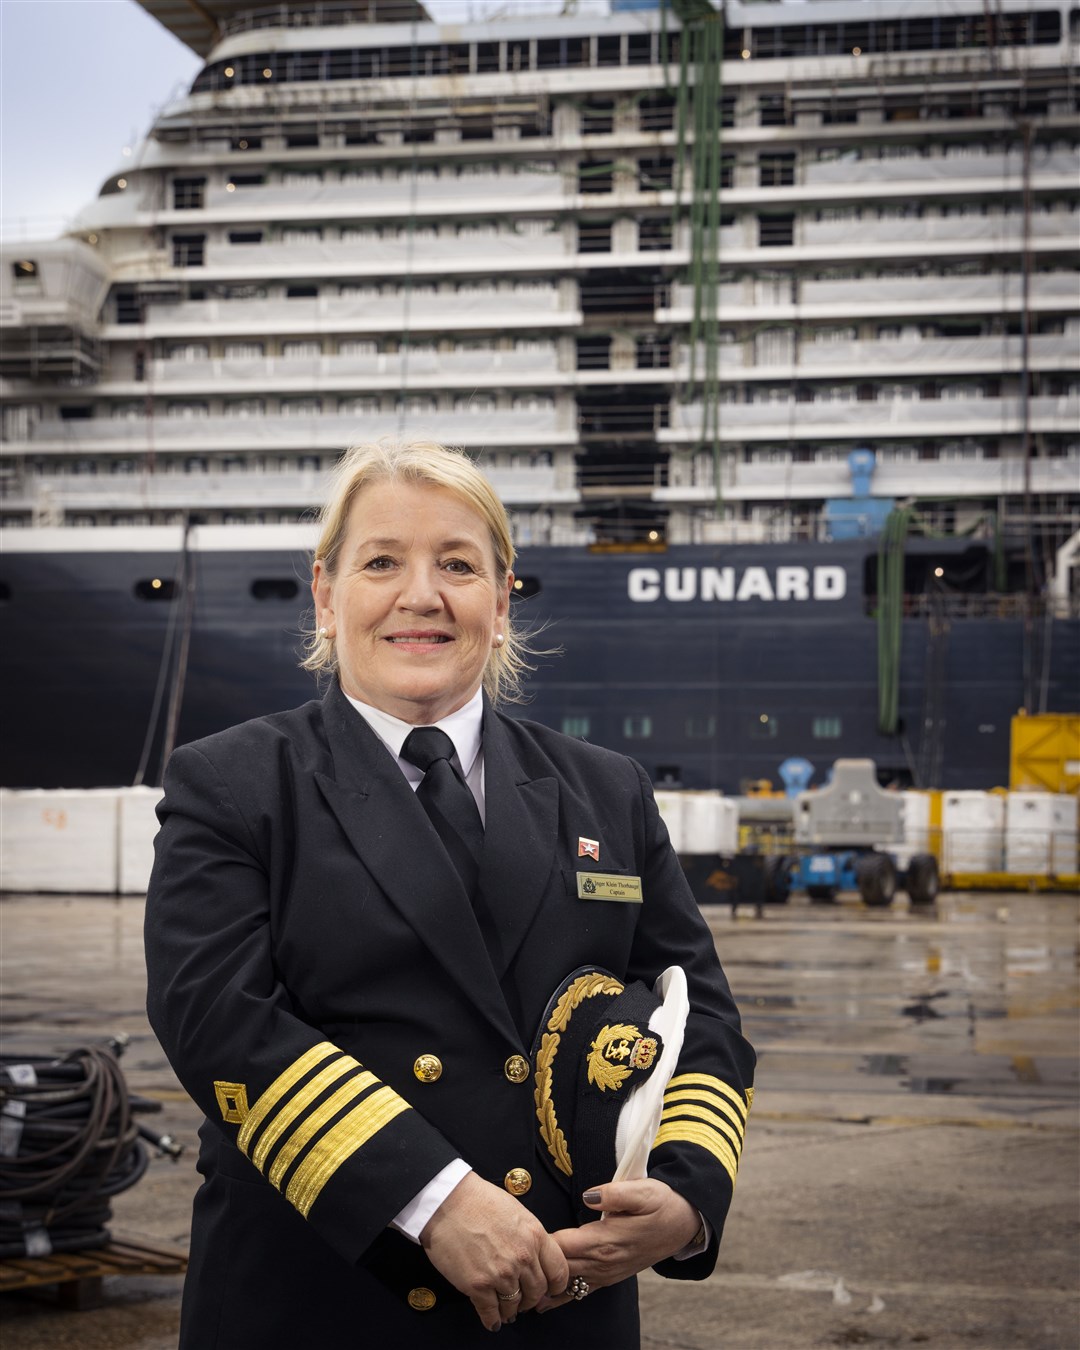 Captain Inger Klein Thorhauge in front of Cunard's new ship, Queen Anne, built at the Fincantieri ship yard near Venice, Italy. Picture Christopher Ison courtesy of Cunard.